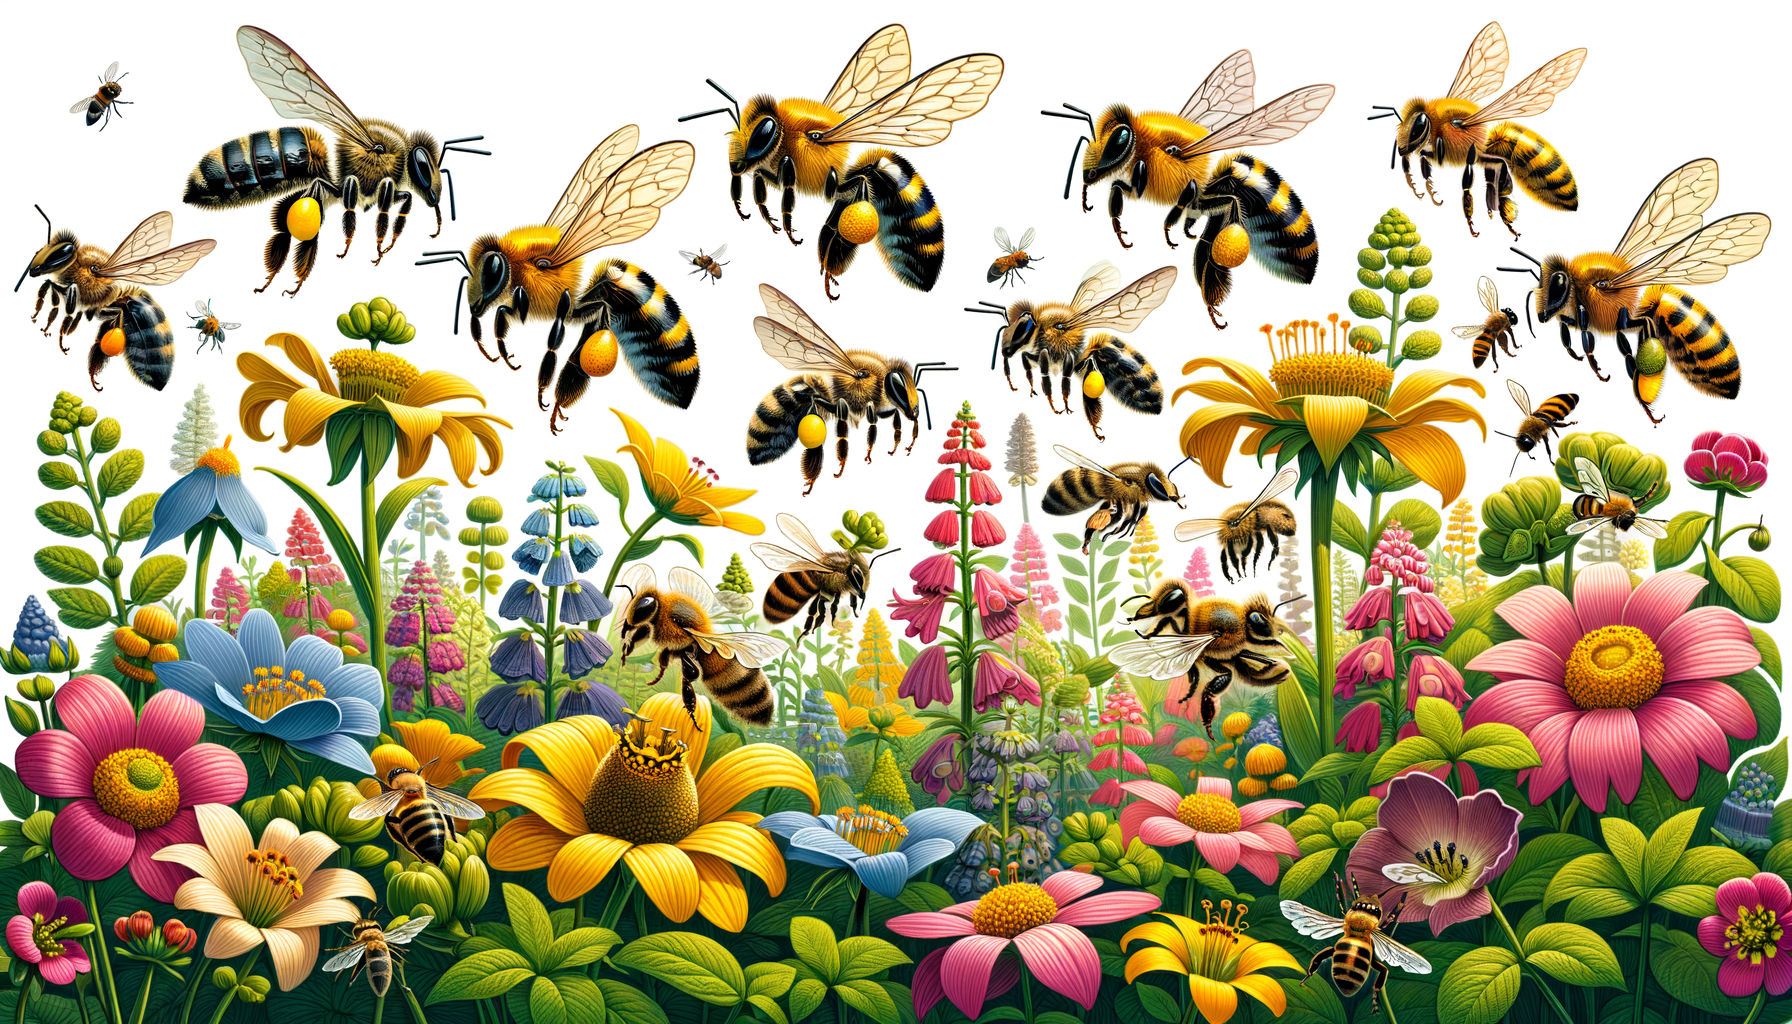 Bees in a Vibrant Garden - The Diversity and Importance of Pollination